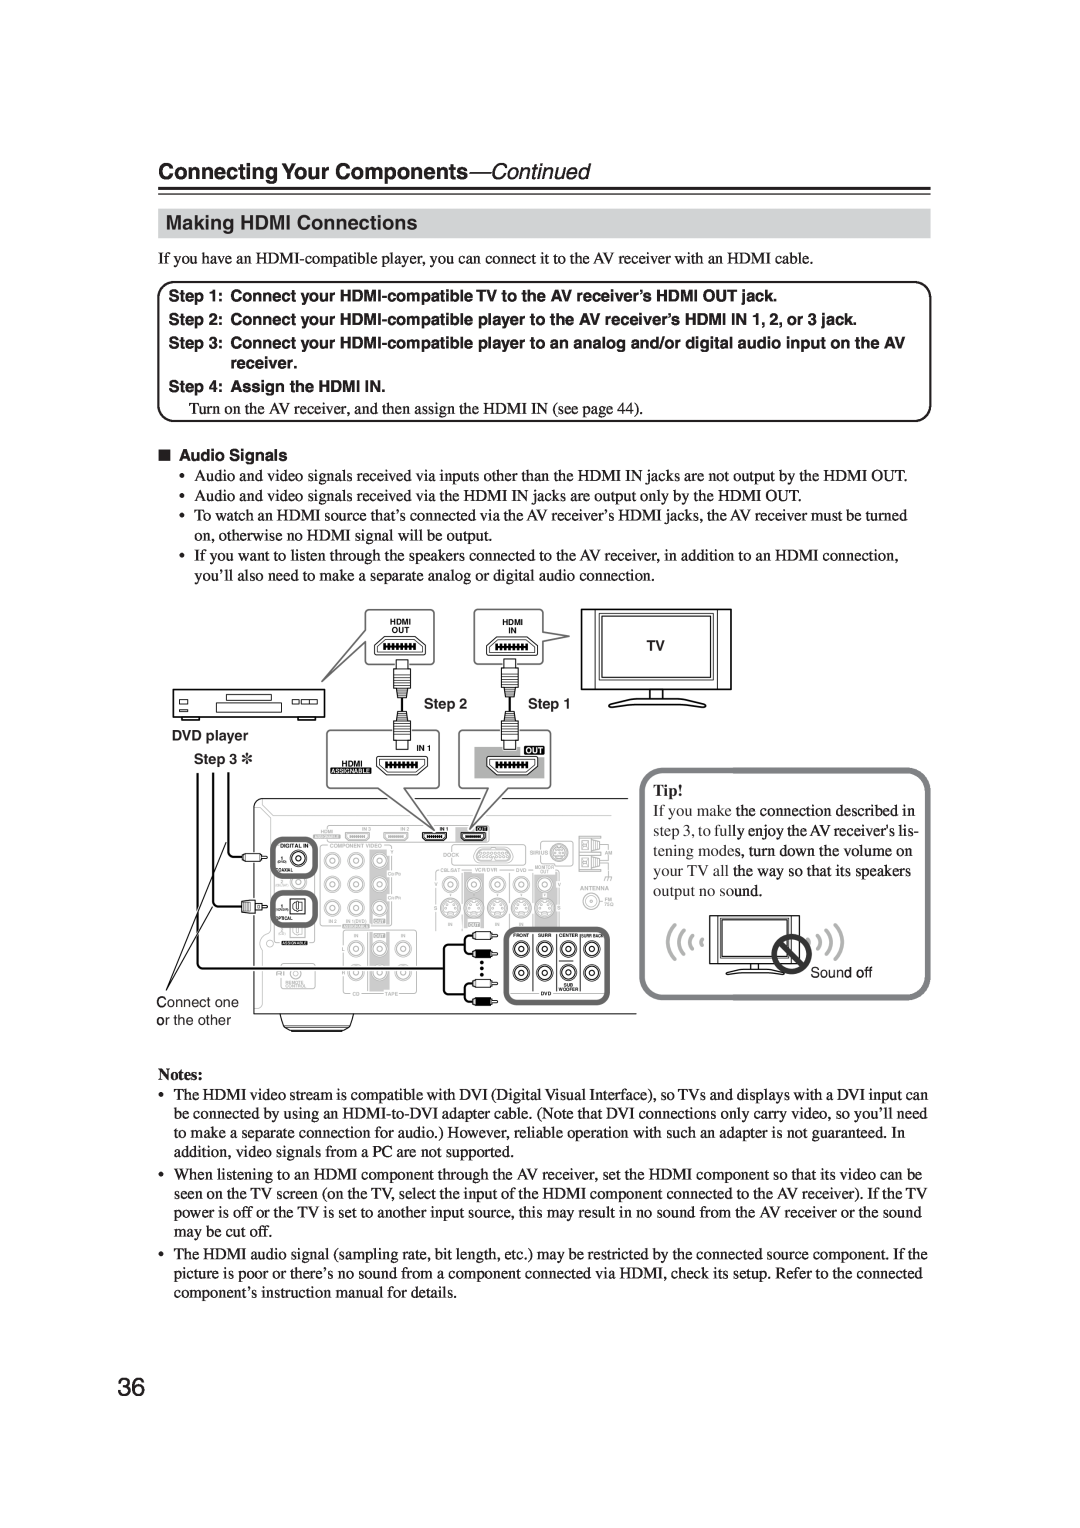 Onkyo S5100 instruction manual Making HDMI Connections, Connecting Your Components—Continued, Notes 